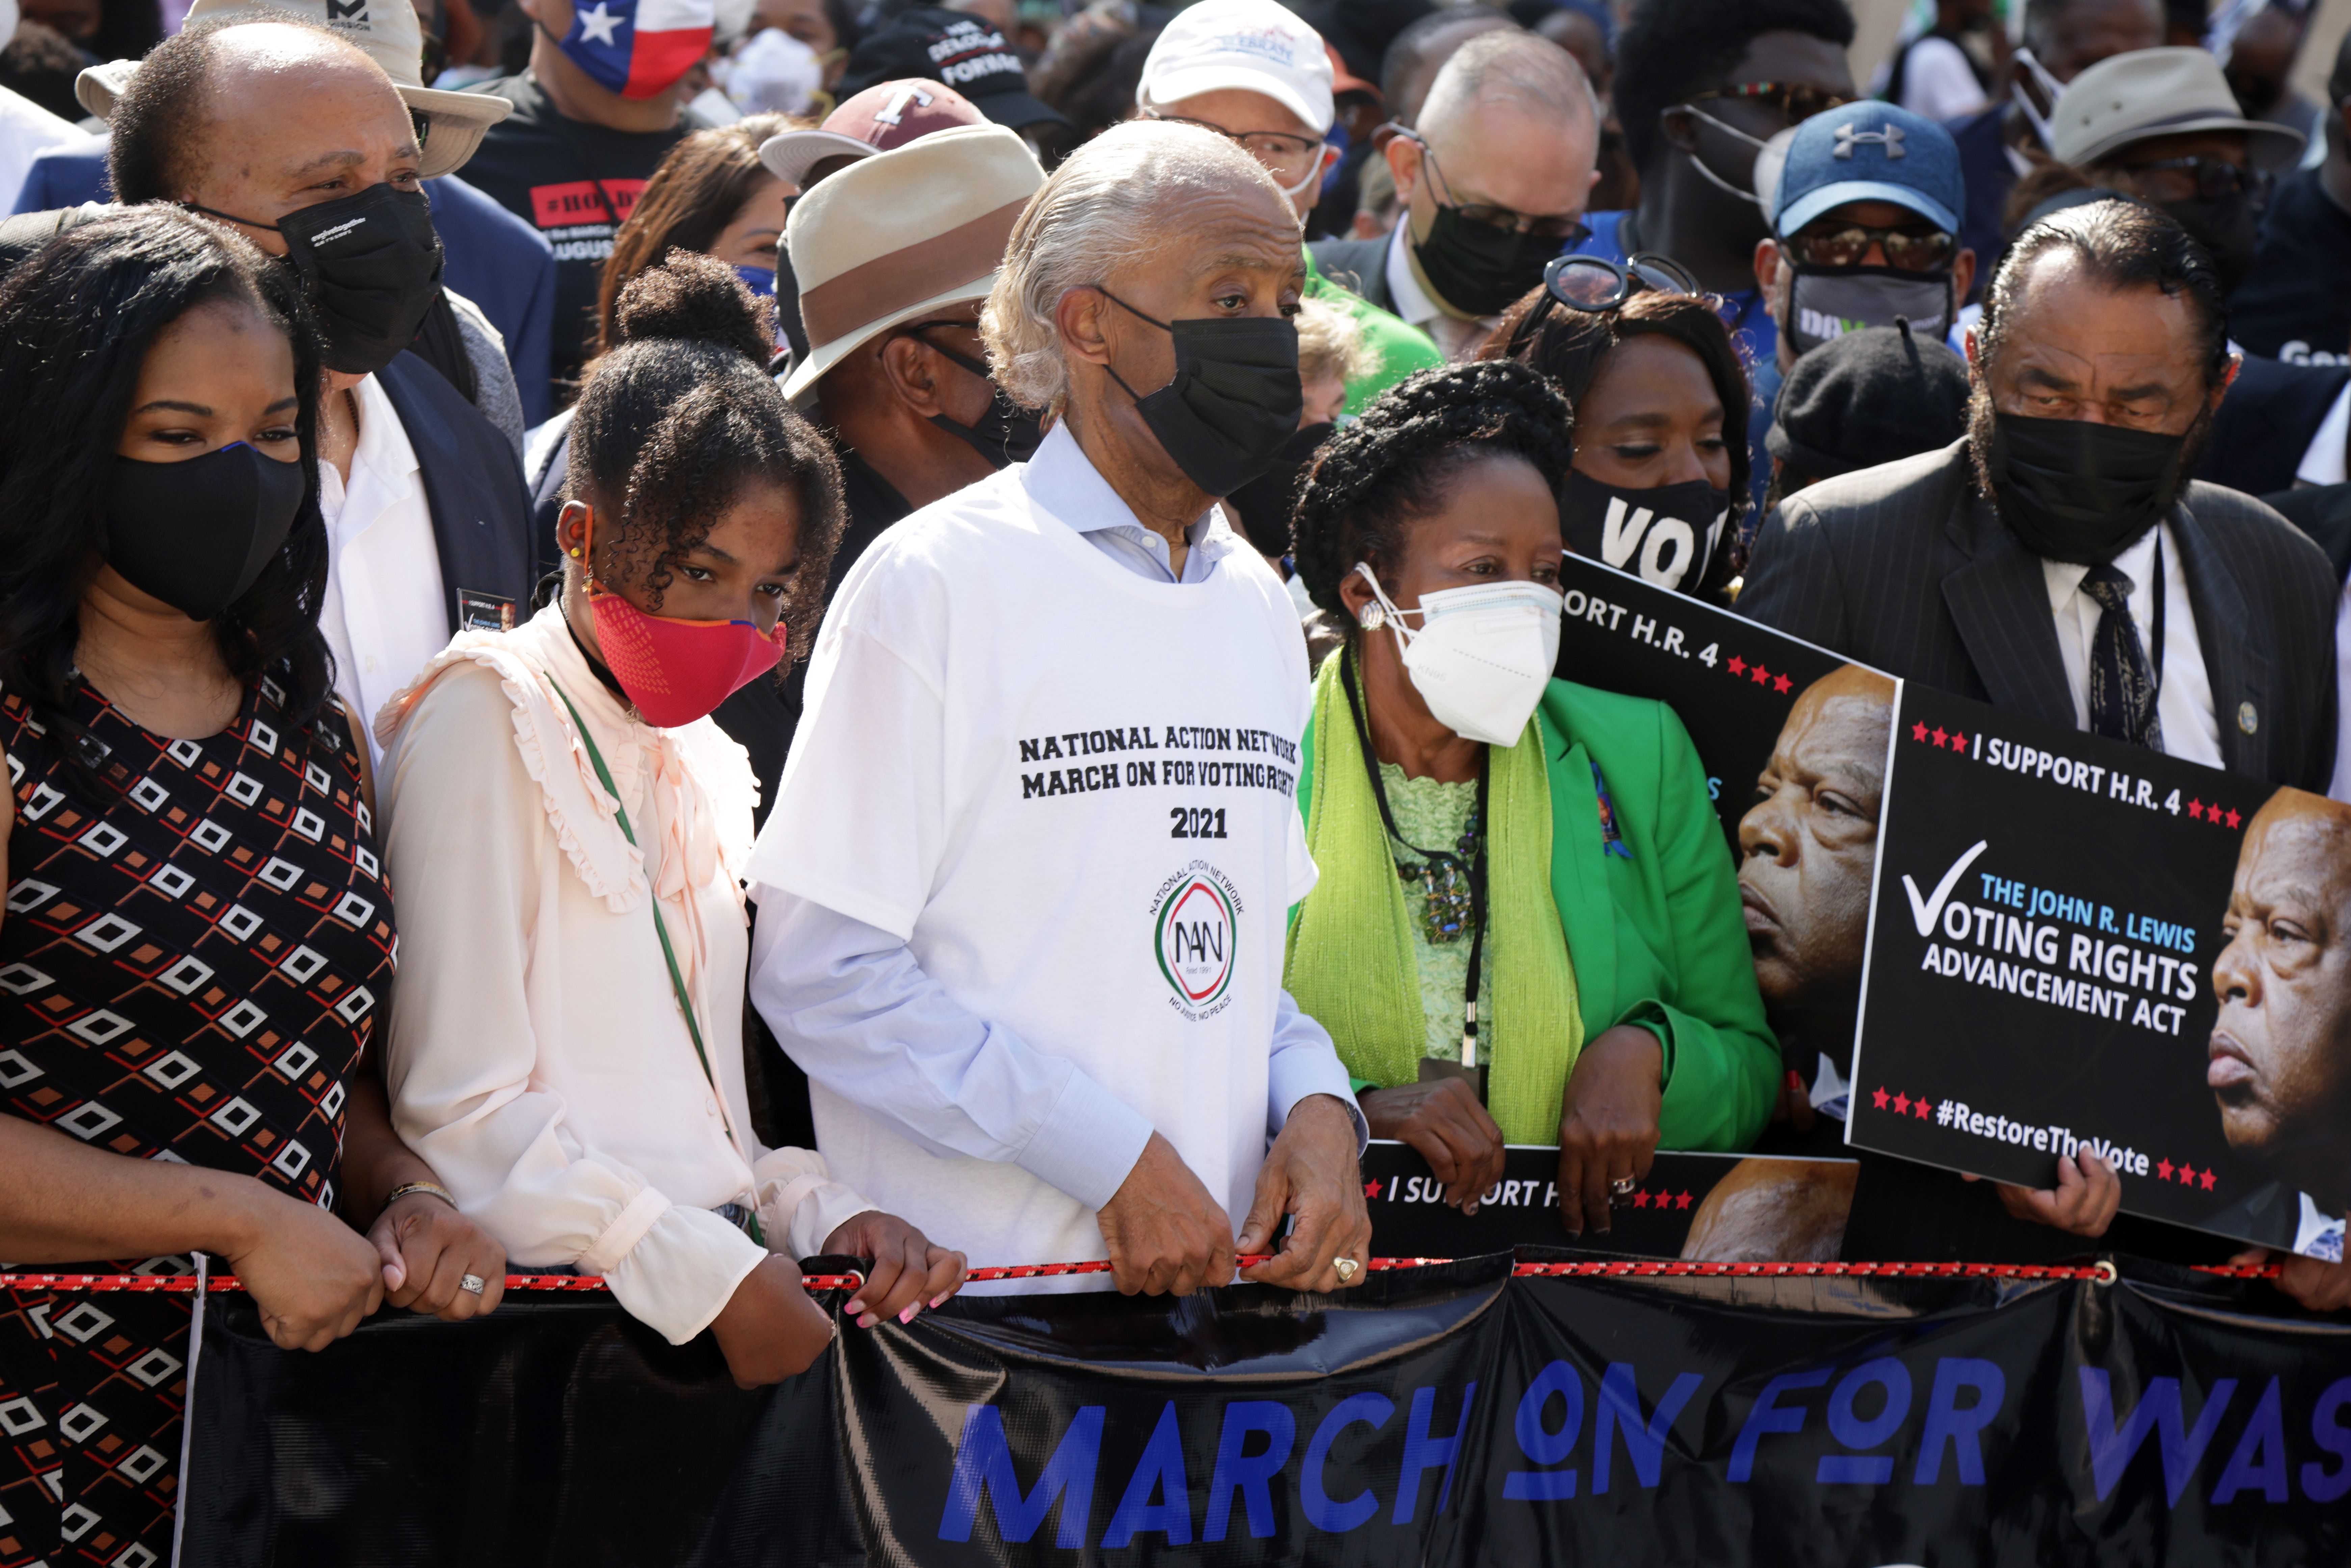 The Rev. Al Sharpton (3rd L, front row), U.S. Rep. Sheila Jackson Lee (D-TX) (4th L, front row) and U.S. Rep. Al Green (D-TX) (R), participates in a March On For Voting Rights.